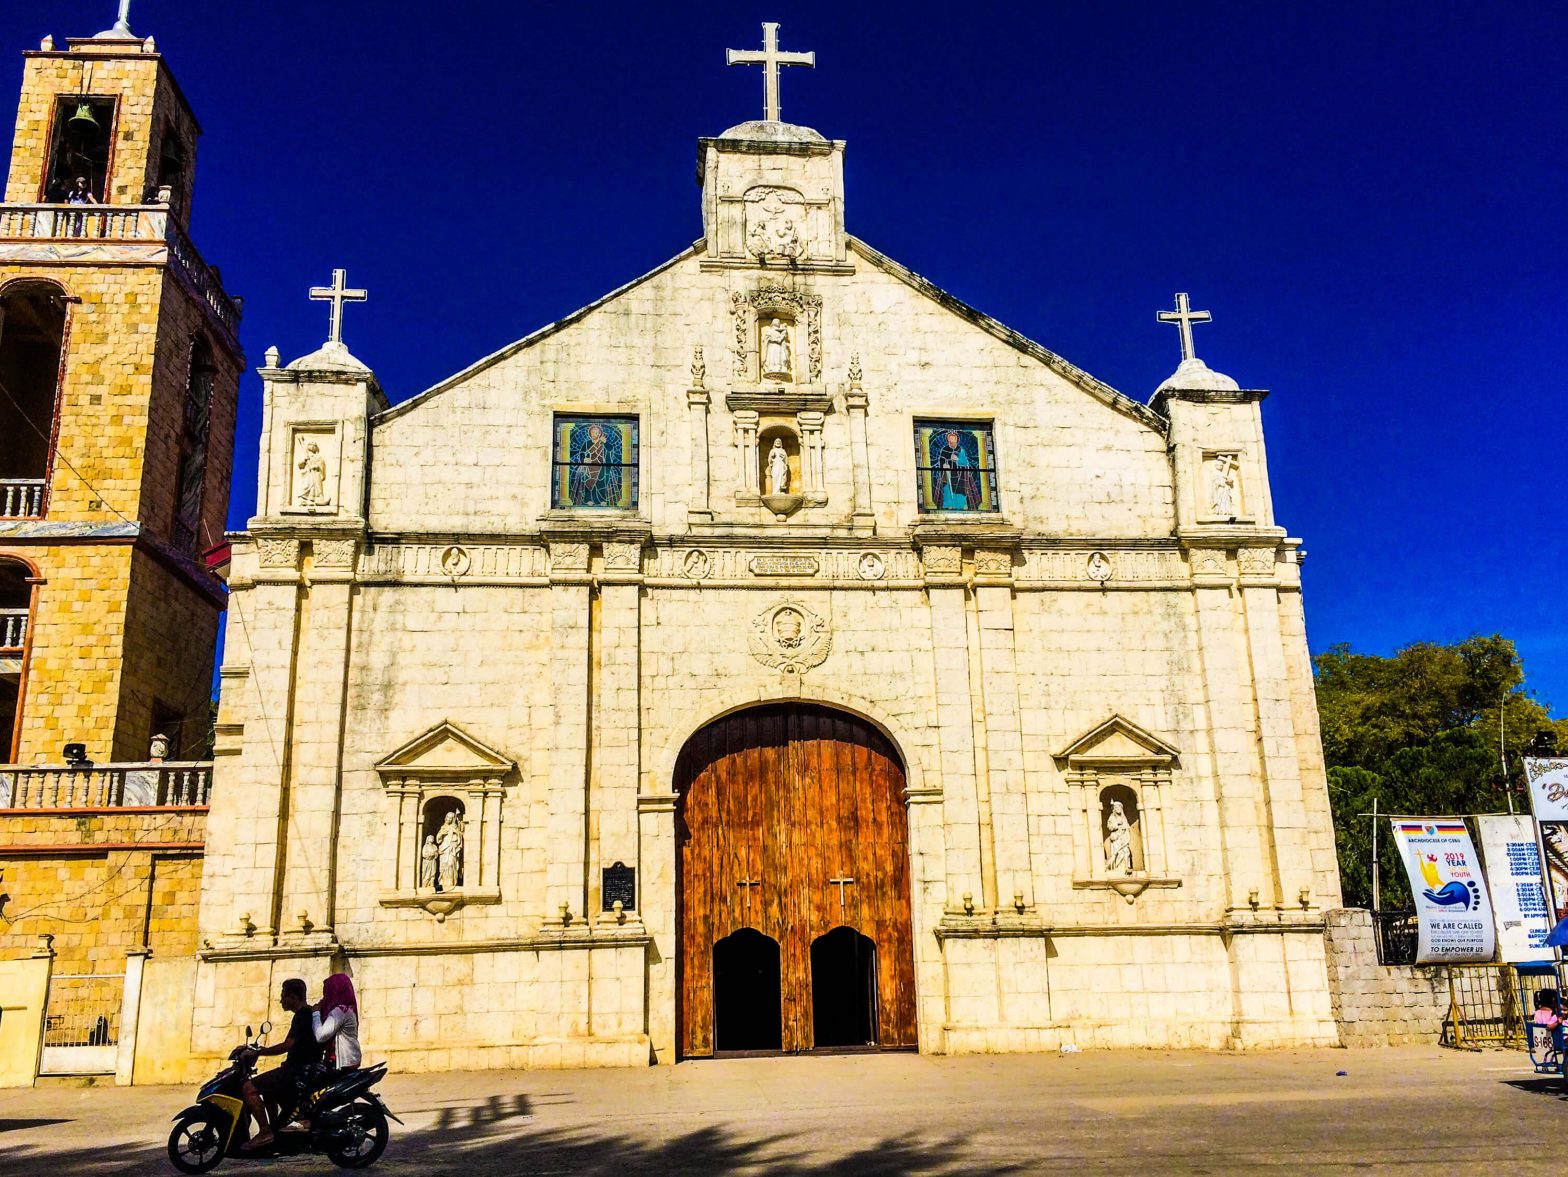 Bantayan is under the patronage of St. Peter; how did St. Paul get into the picture?